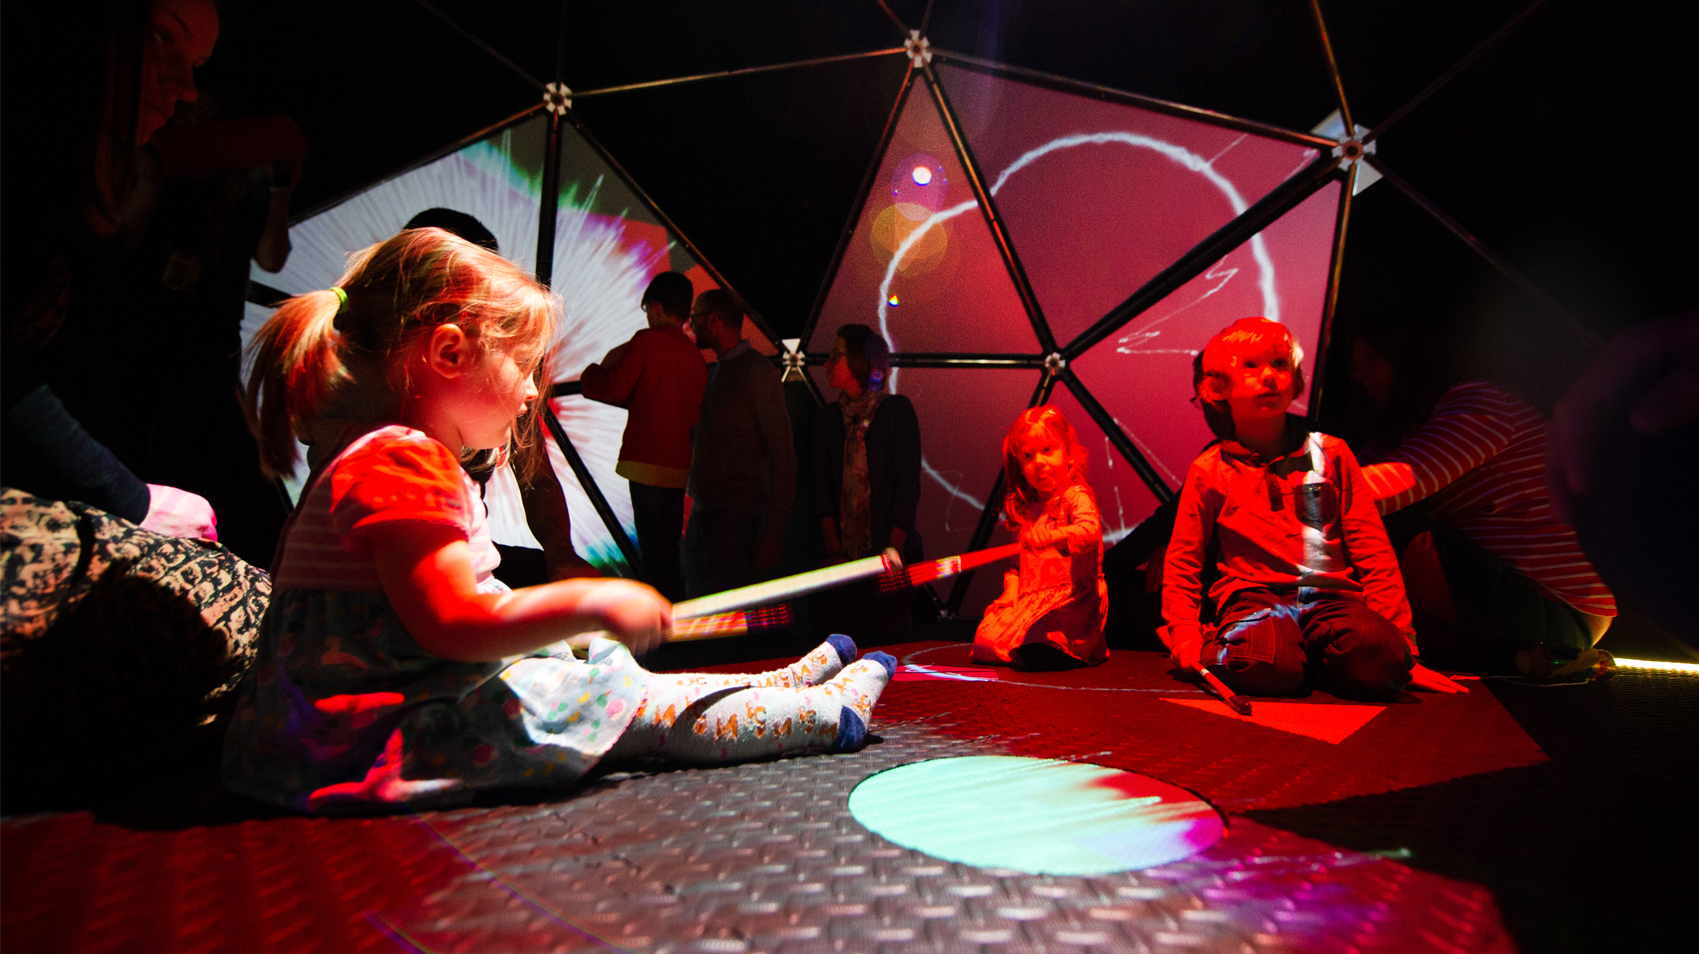 Children play with instruments in dimly lit red light inside a geometric dome